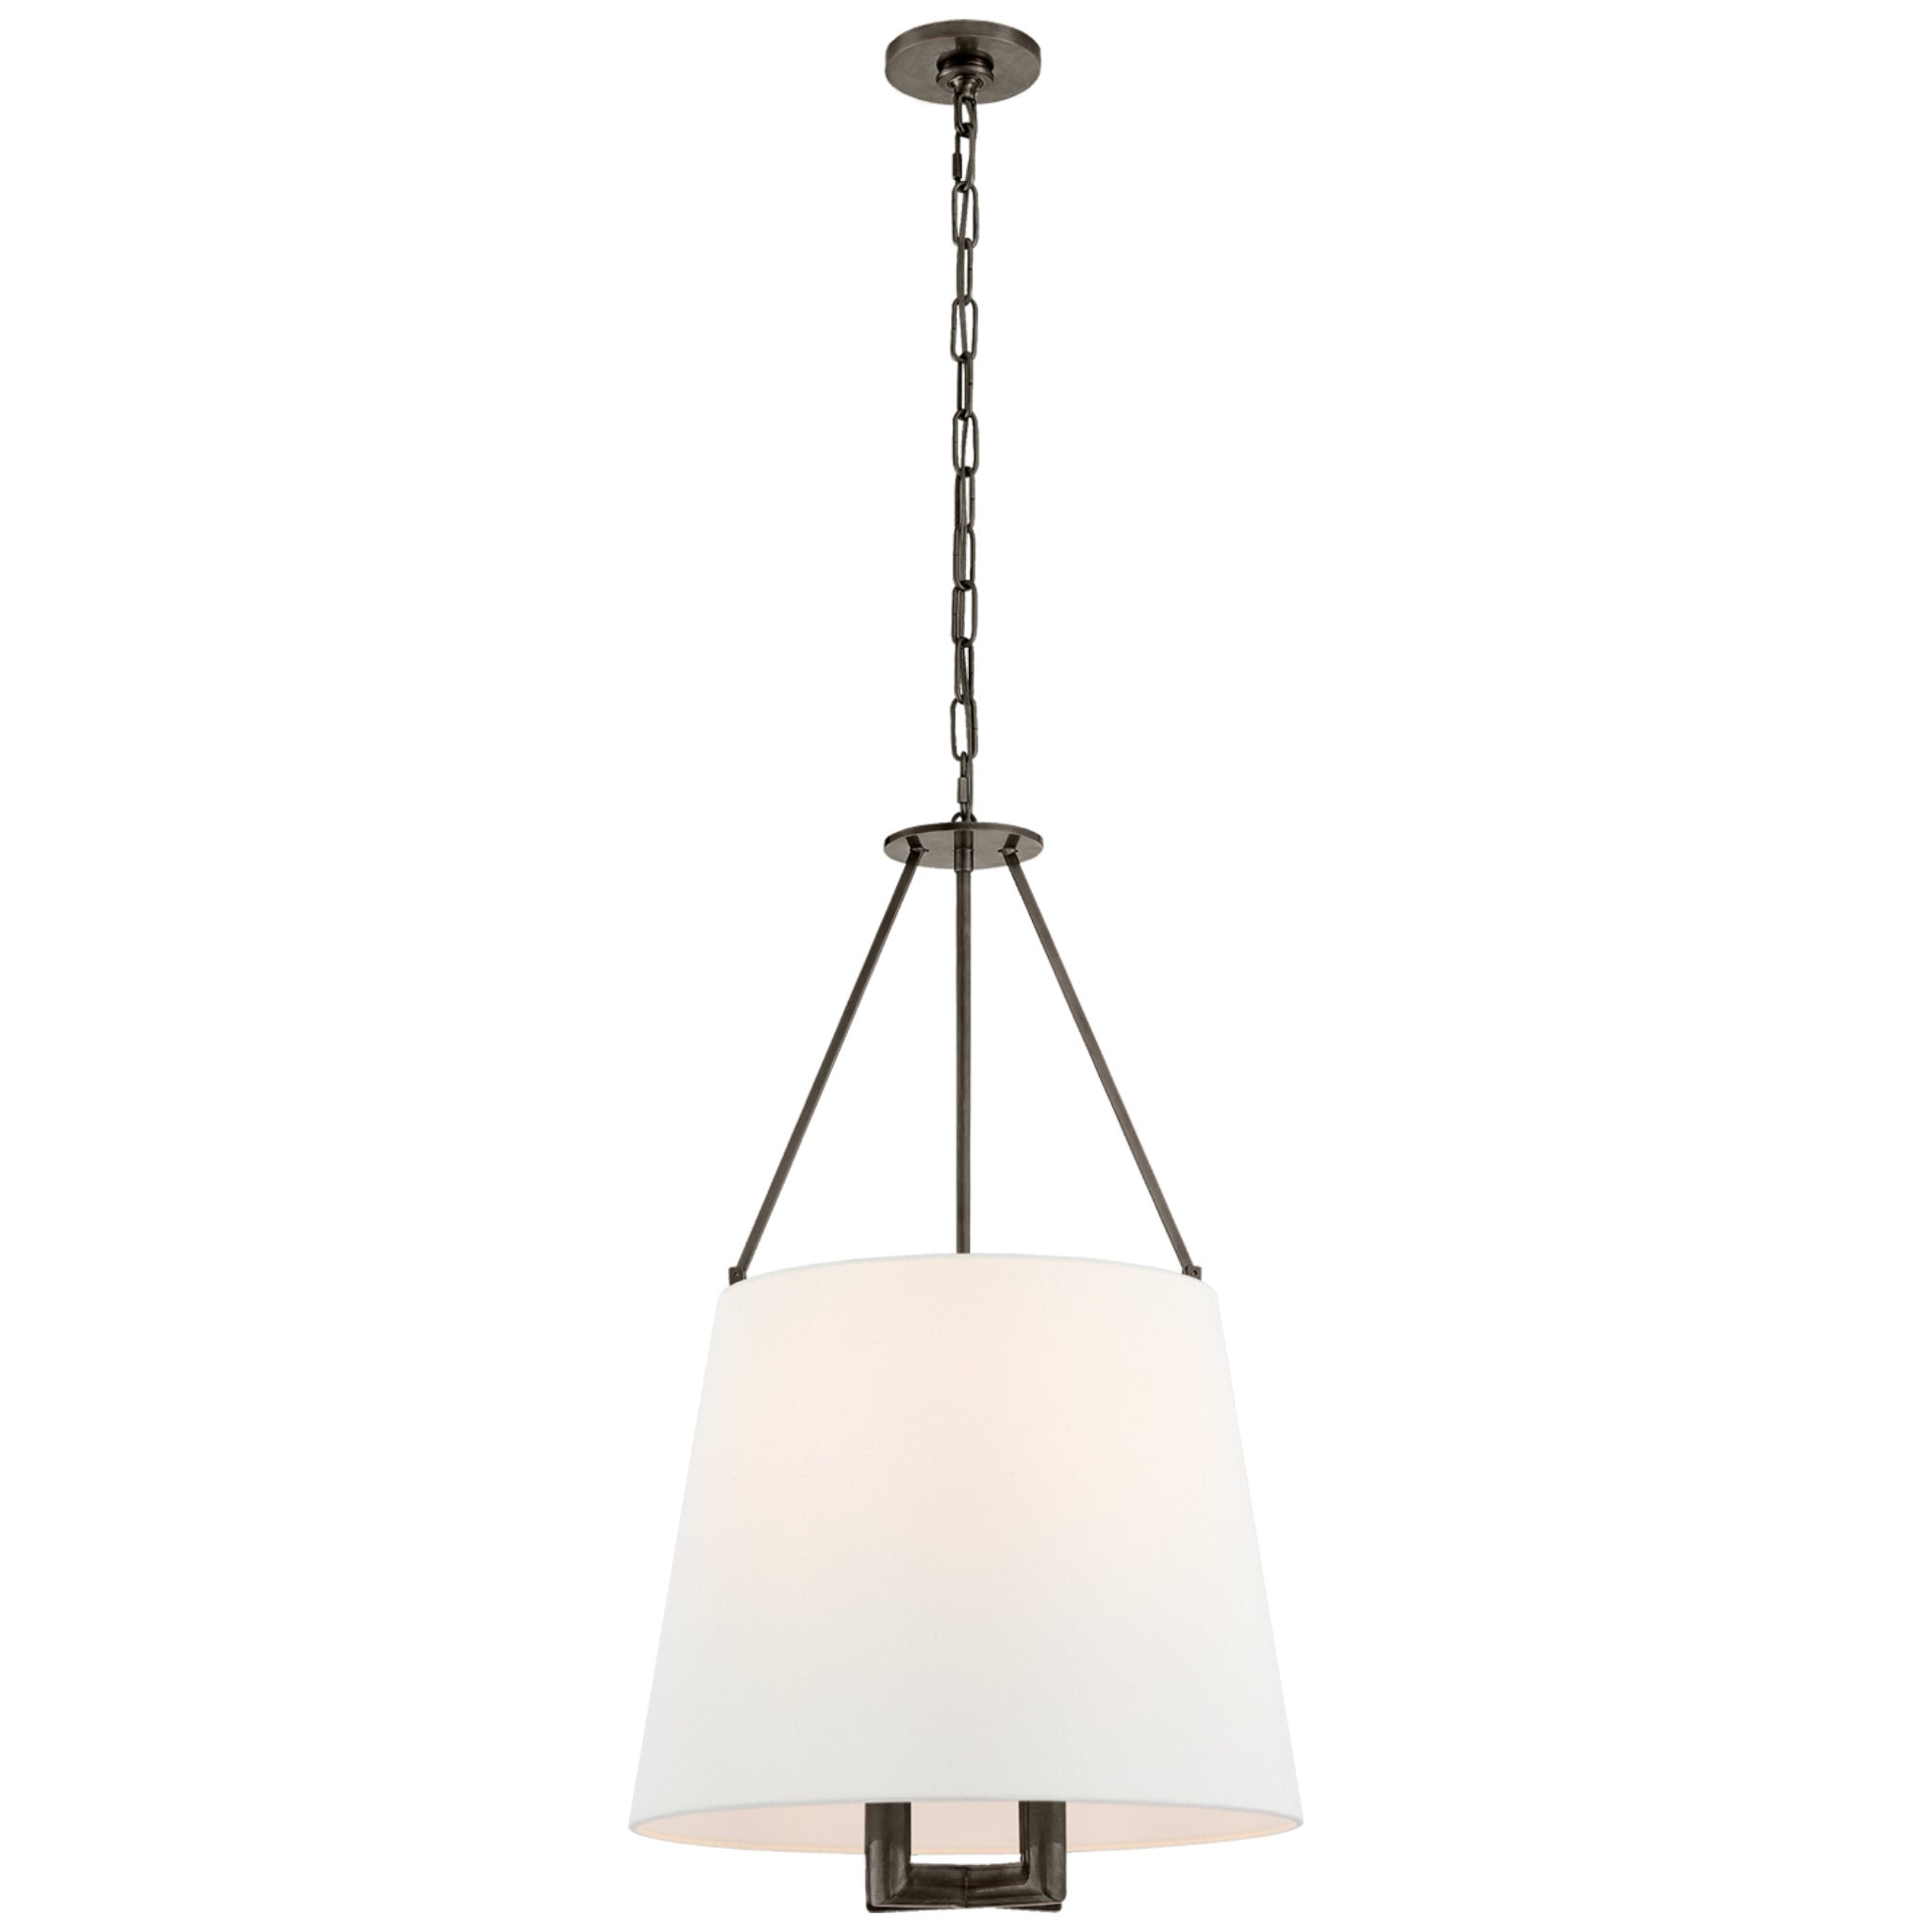 J. Randall Powers Dalston Hanging Shade in Bronze with Linen Shade